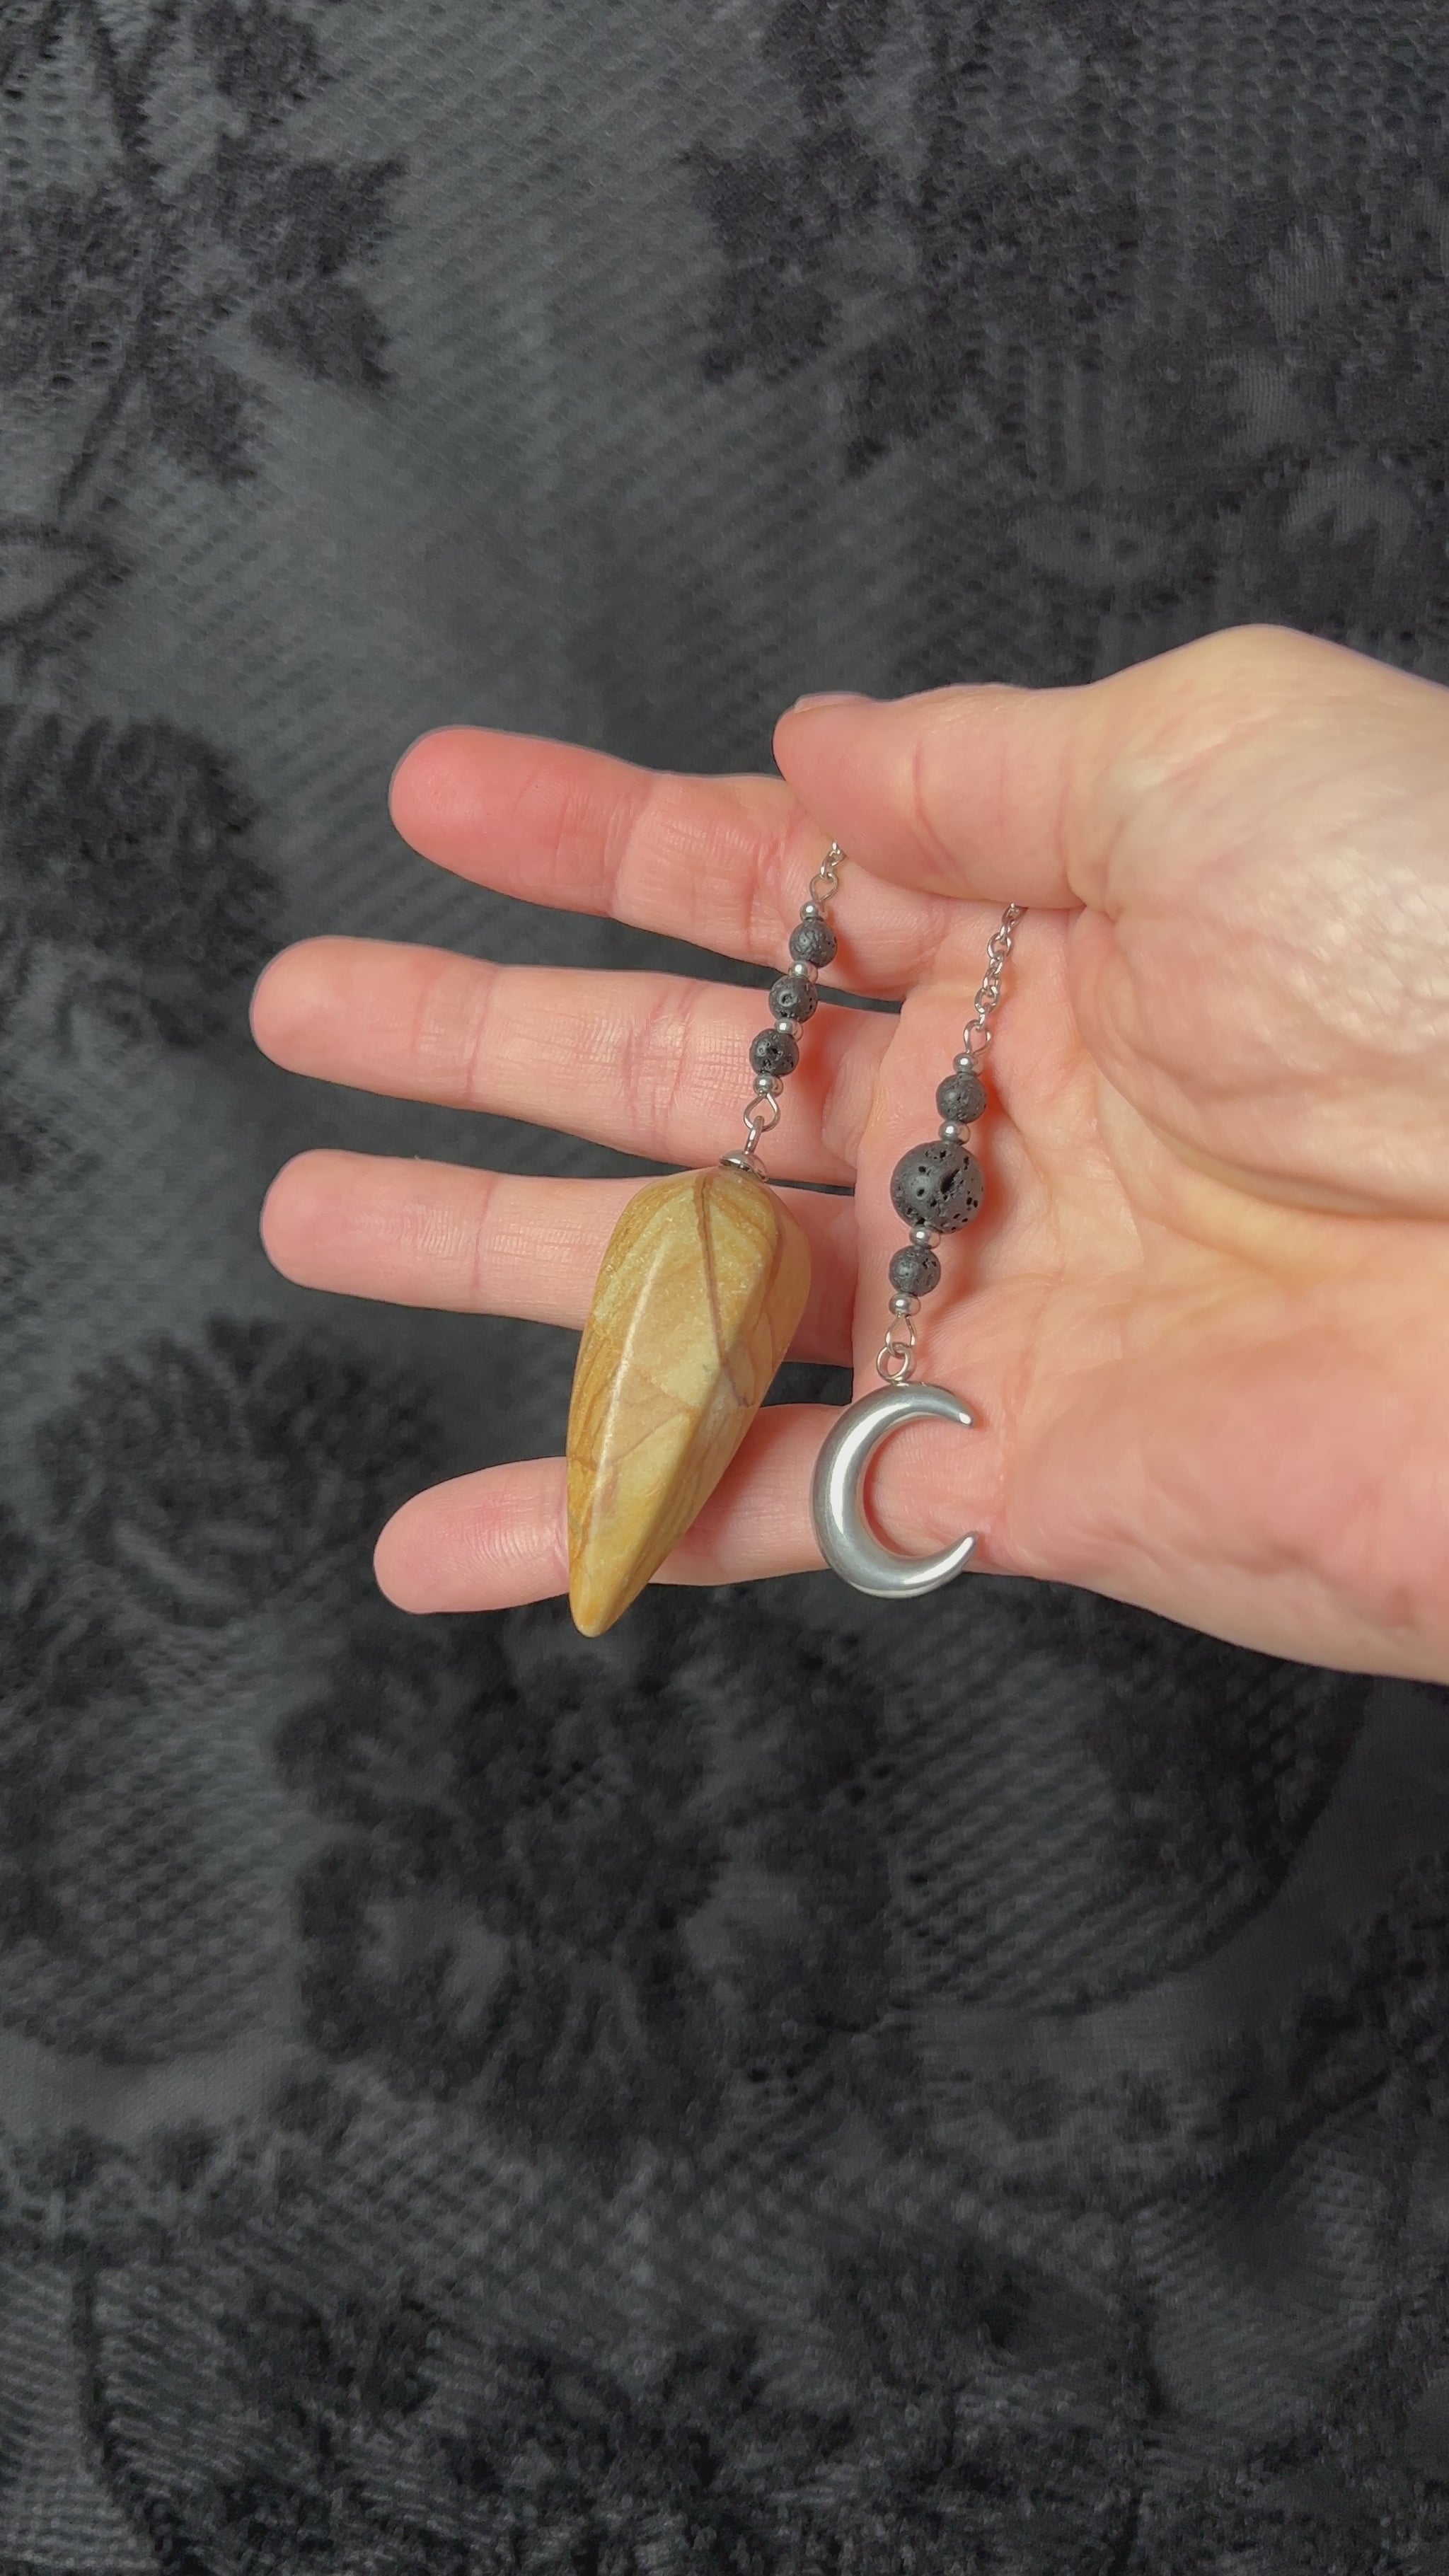 Divination pendulum picture jasper lava rock stainless steel with a crescent moon gemstone pendulum for dowsing fortune telling witchcraft